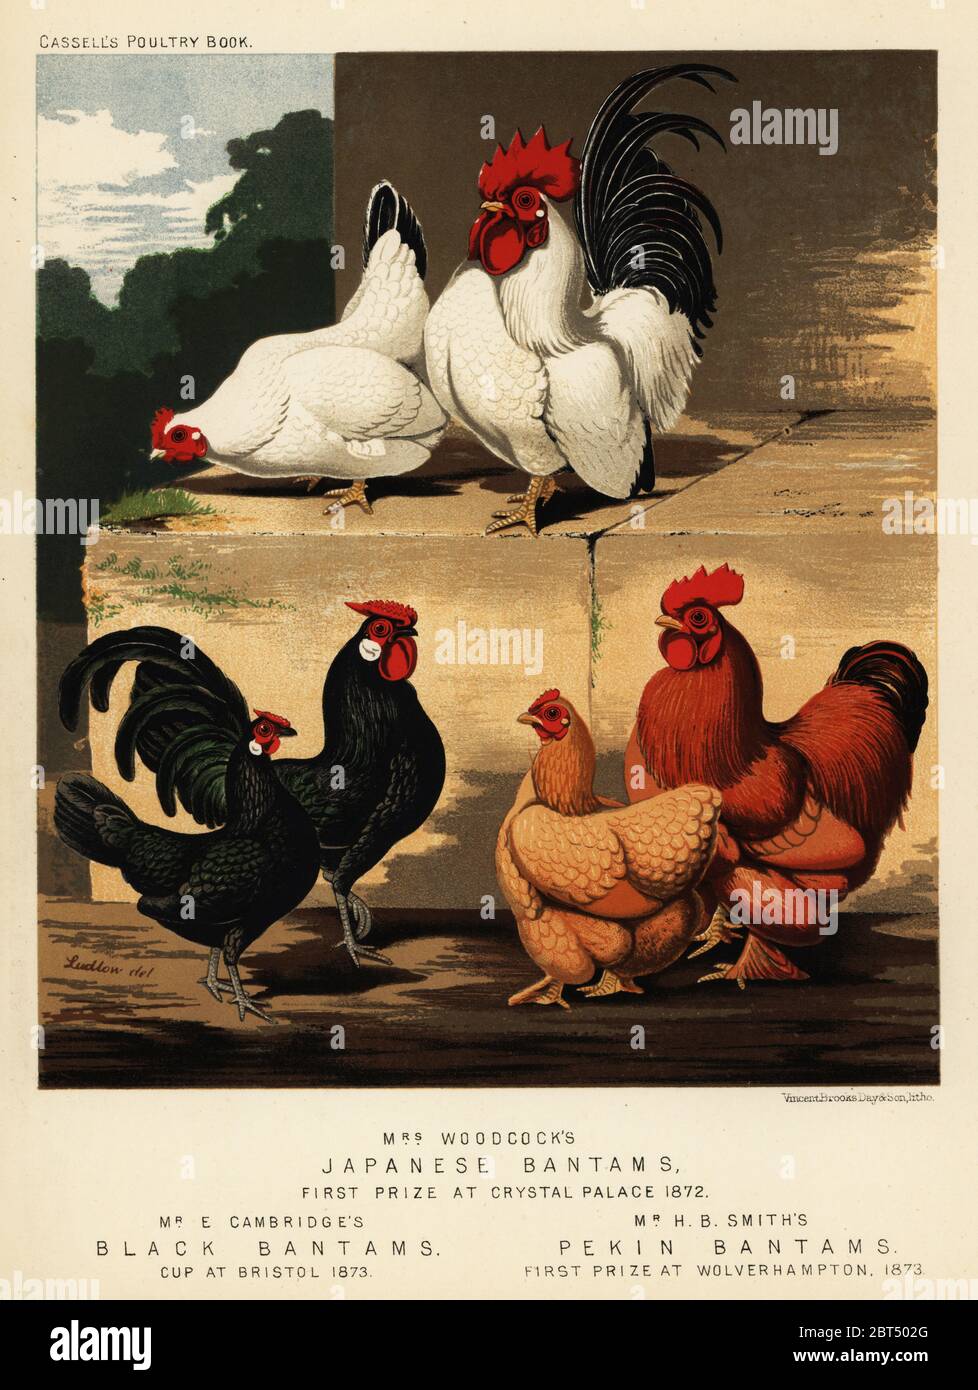 Japanese bantams, black bantams and Pekin bantams. Mrs. Woodcocks Japanese white bantams, first prize at Crystal Palace 1872. E. Cambridges black bantams, cup winner at Bristol 1873. H. B. Smiths Peking bantams, first prize at Wolverhampton 1873. Chromolithograph by Vincent Brooks Day & Son after an illustration by J.W. Ludlow from Lewis Wrights The Illustrated Book of Poultry, Cassell, London, 1890. Stock Photo